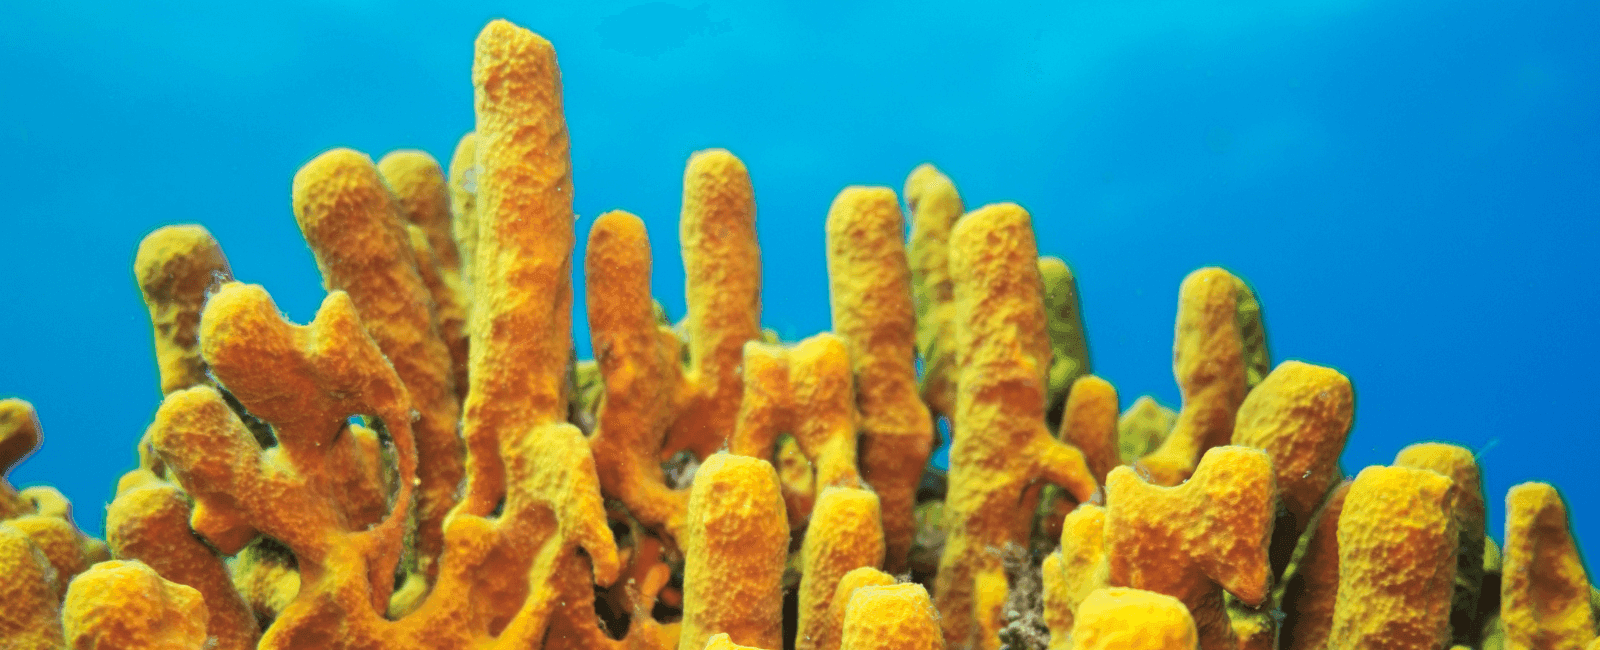 Marine Fungi Found on Sea Sponges Show Promising Potential in Treating Drug-Resistant Infections